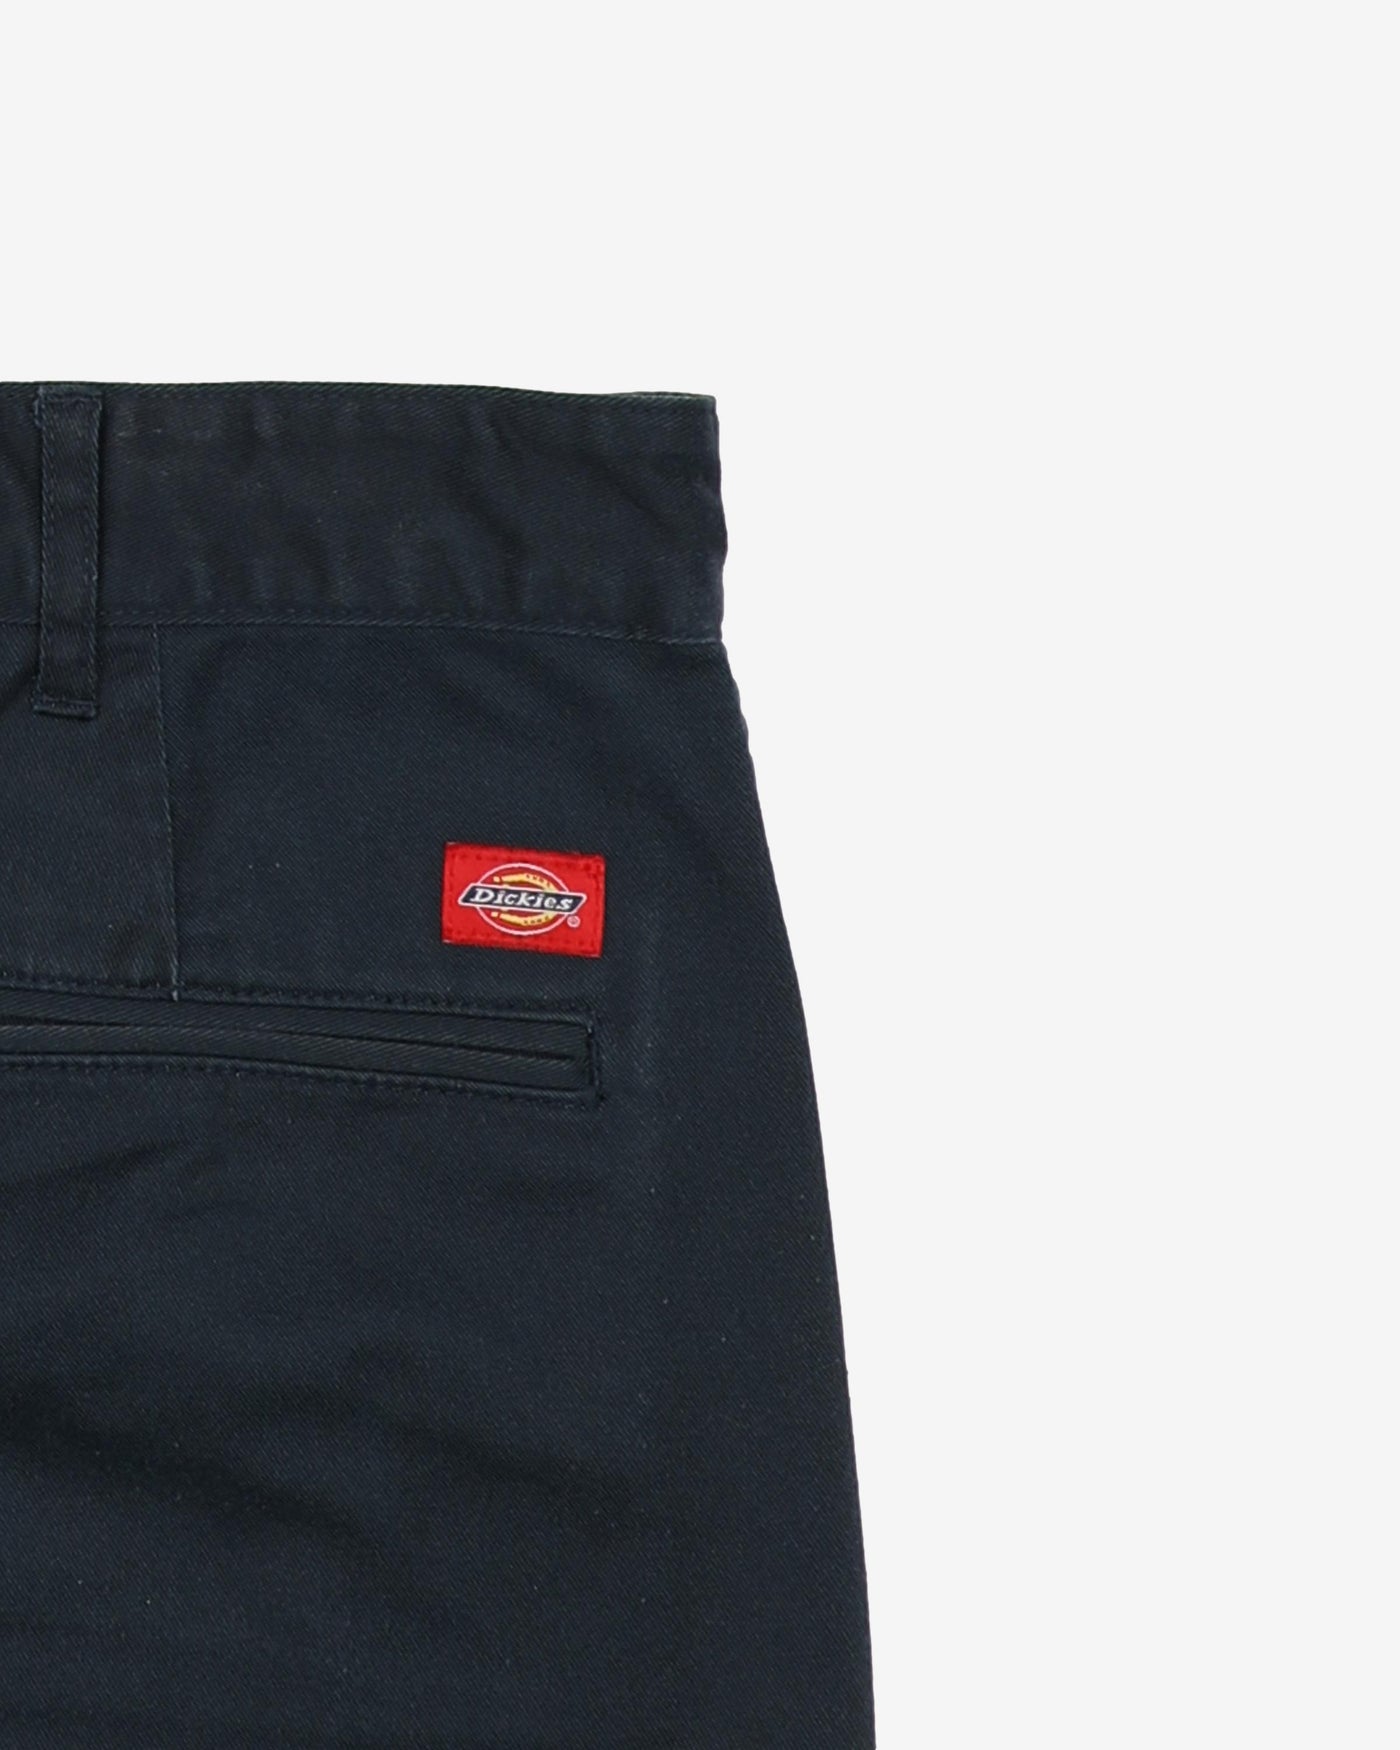 Dickies Navy Cuffed Pants / Trousers - W36 L29